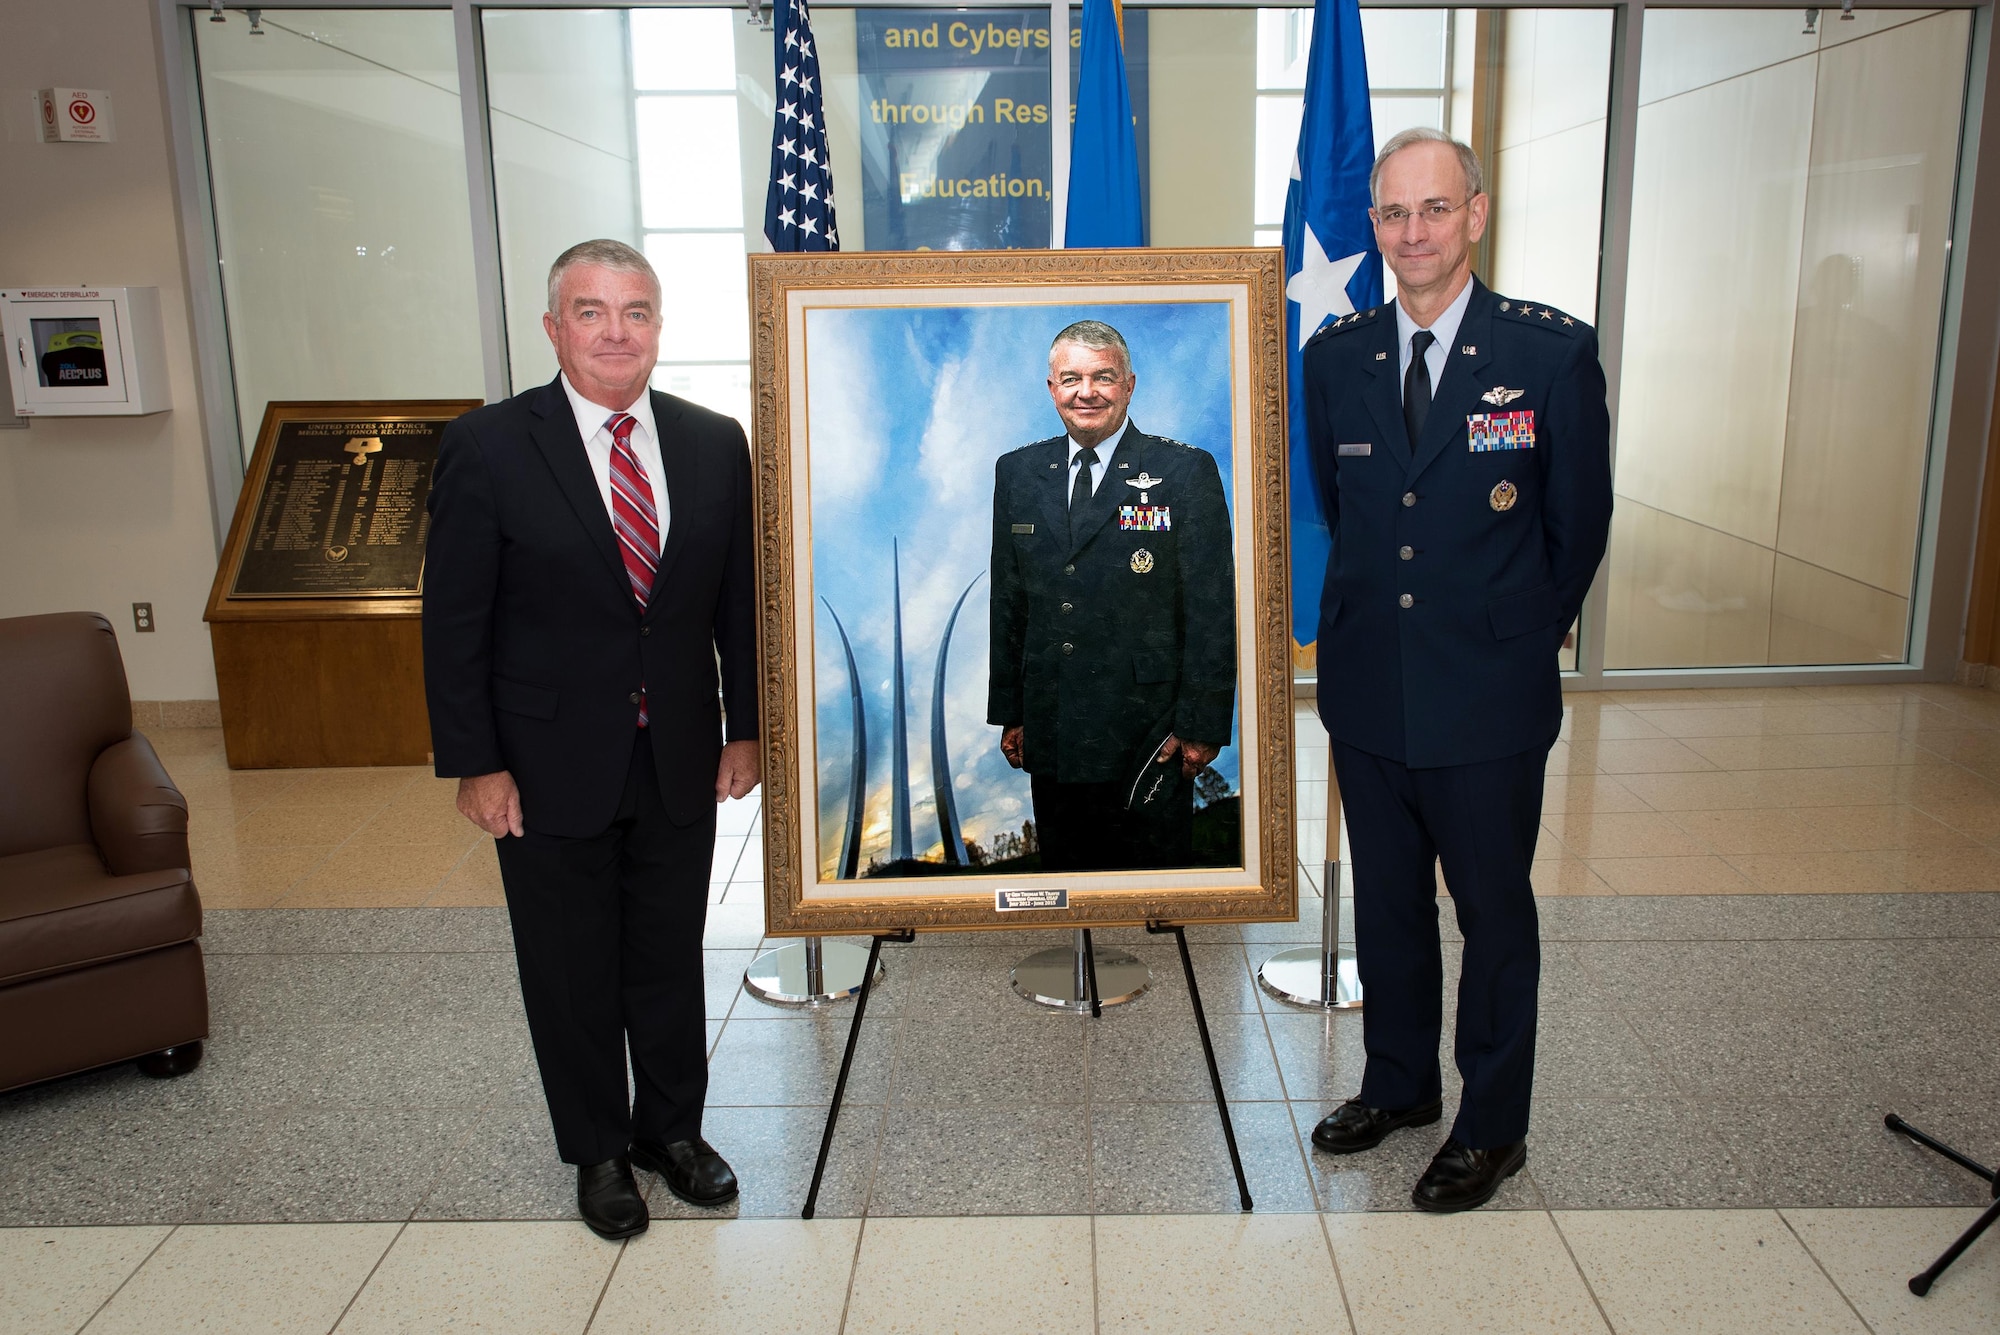 Lt. Gen. (ret) Thomas W. Travis (left), who served as the 21st Surgeon General of the United States Air Force, and Lt. Gen. Mark A. Ediger, current Air Force Surgeon General, unveil a portrait of Travis to hang in the United States Air Force School of Aerospace Medicine during a ceremony here Oct. 24, 2016. The School -- part of the Air Force Research Laboratory's 711th Human Performance Wing -- displays portraits of all past Air Force Surgeons General. Travis served in the role from July 2012 until June 2015, and also served as the School's commander from July 2001 to February 2003. "I'm very, very proud of my history with the School," Travis said at the ceremony, "during my times as a student, my time as commander and my time as the surgeon general. "The School has a bright future, and I look forward to seeing how they continue to accomplish their tremendous mission." (U.S. Air Force photo/Rick Eldridge)